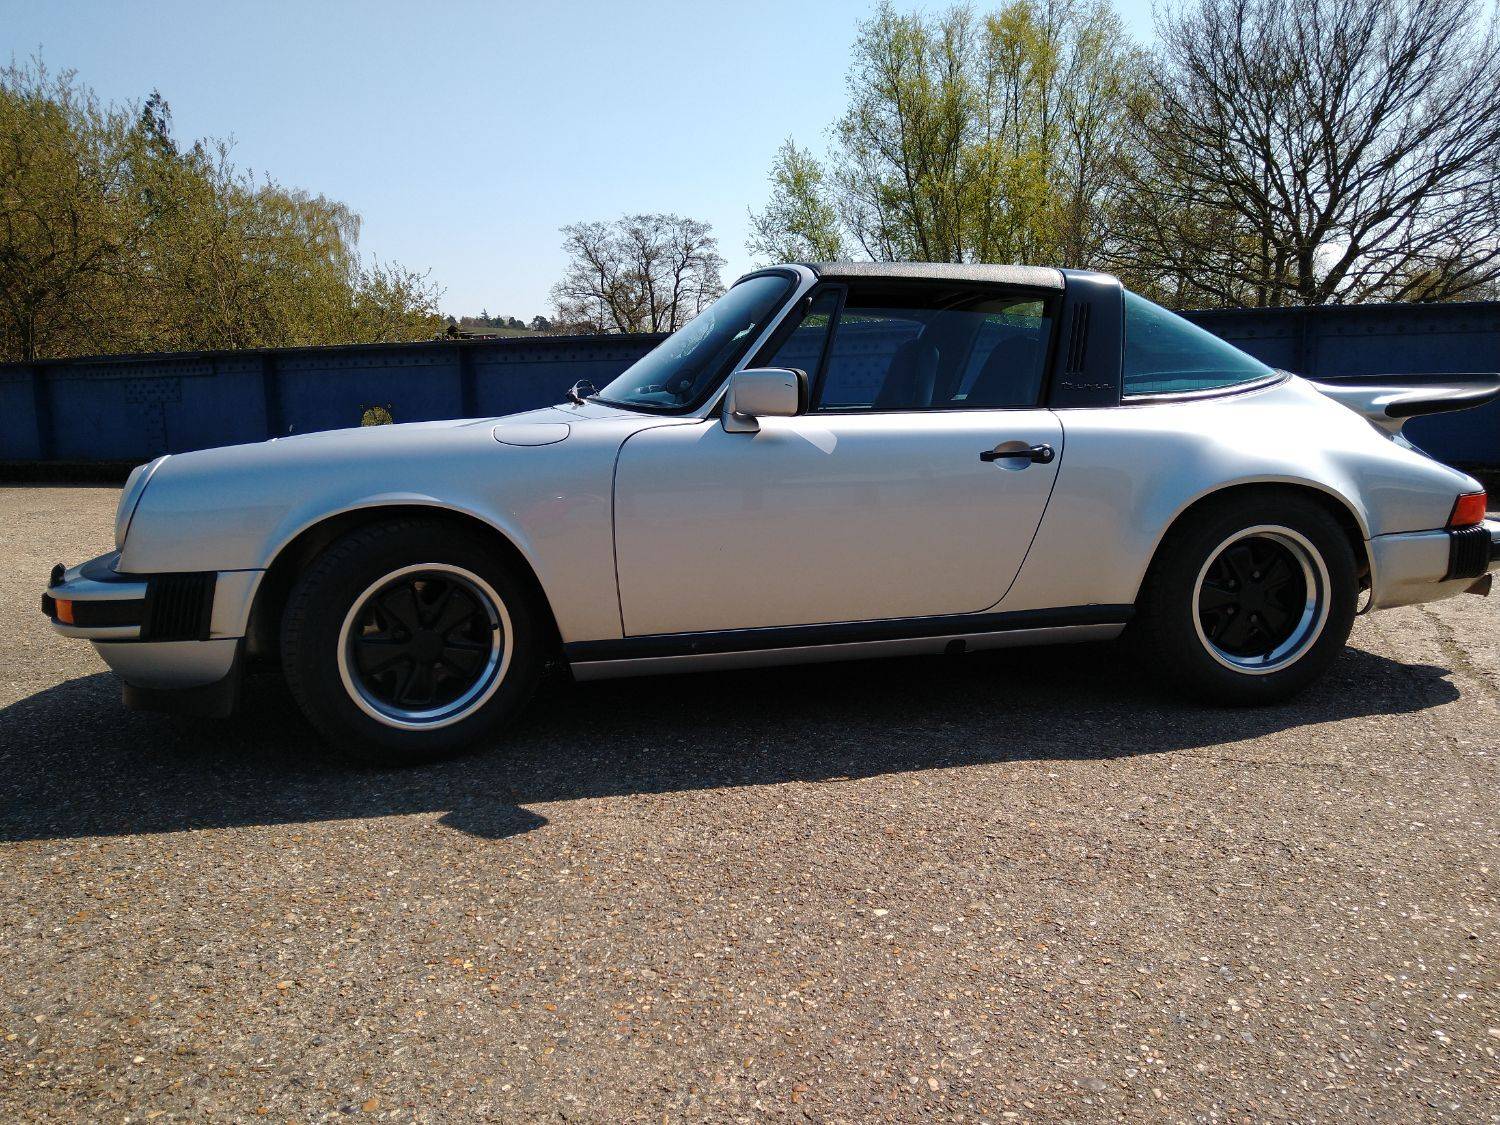 For Sale: Porsche 911 Carrera  (1976) offered for GBP 67,000